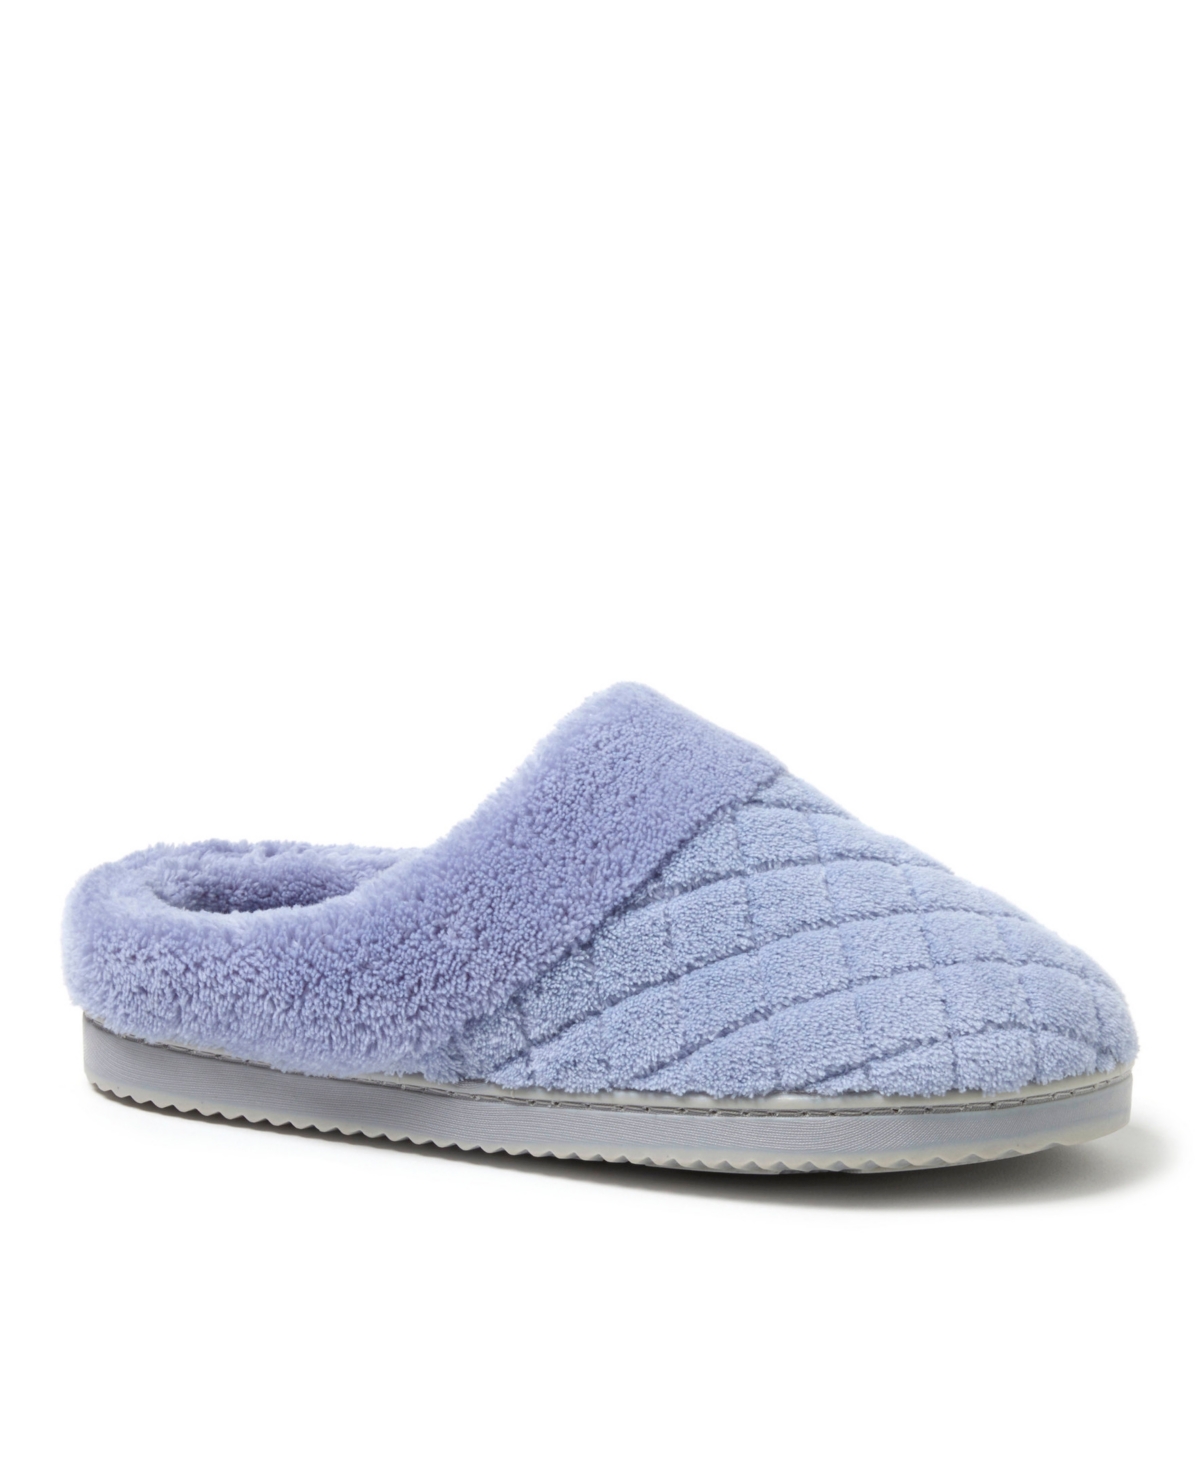 Dearfoams Women's Libby Quilted Terry Clog Slippers In Eventide